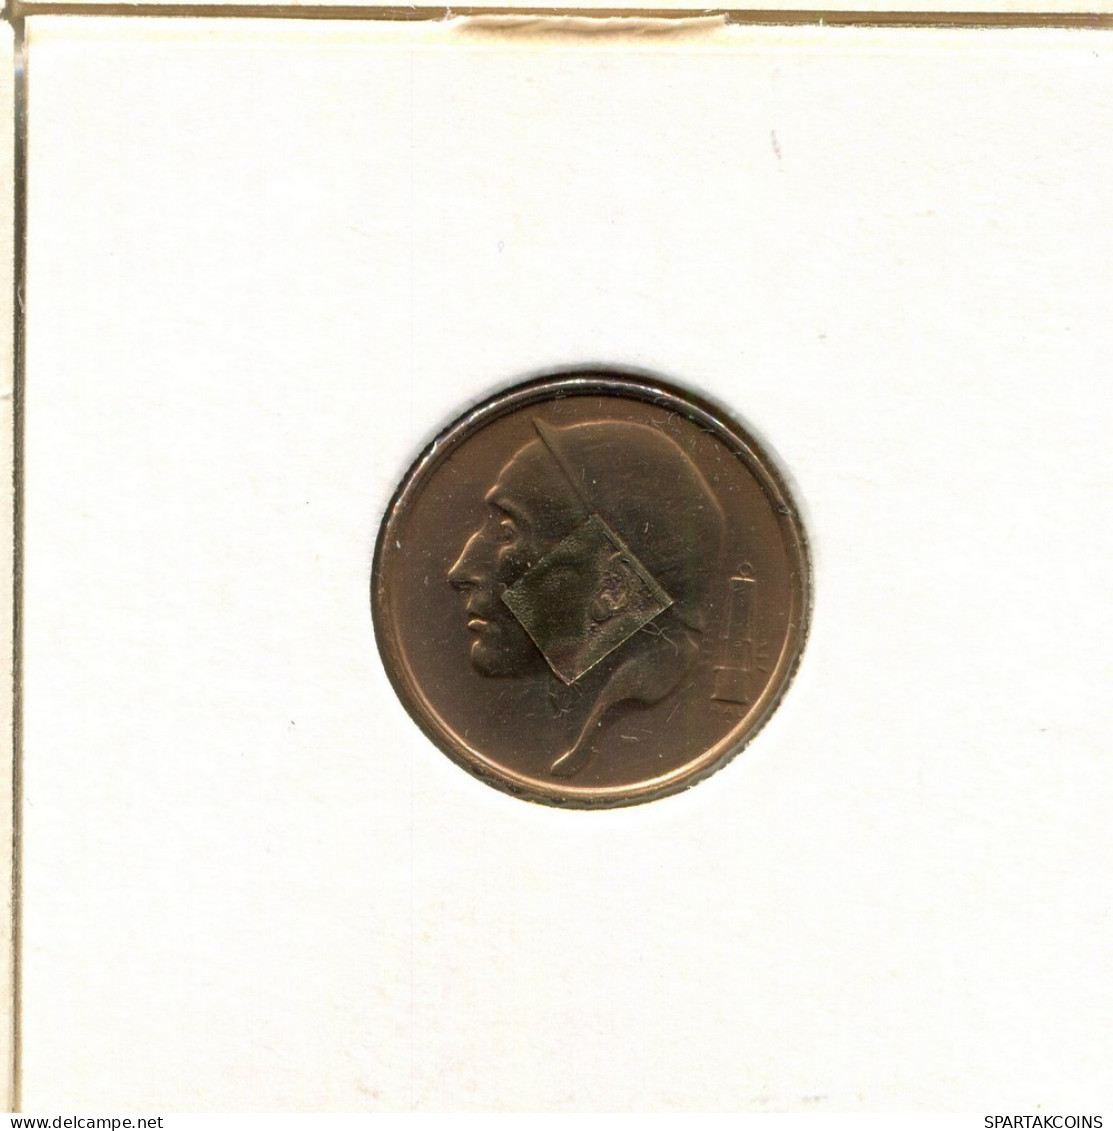 50 CENTIMES 1993 FRENCH Text BELGIUM Coin #BB289.U.A - 50 Cents